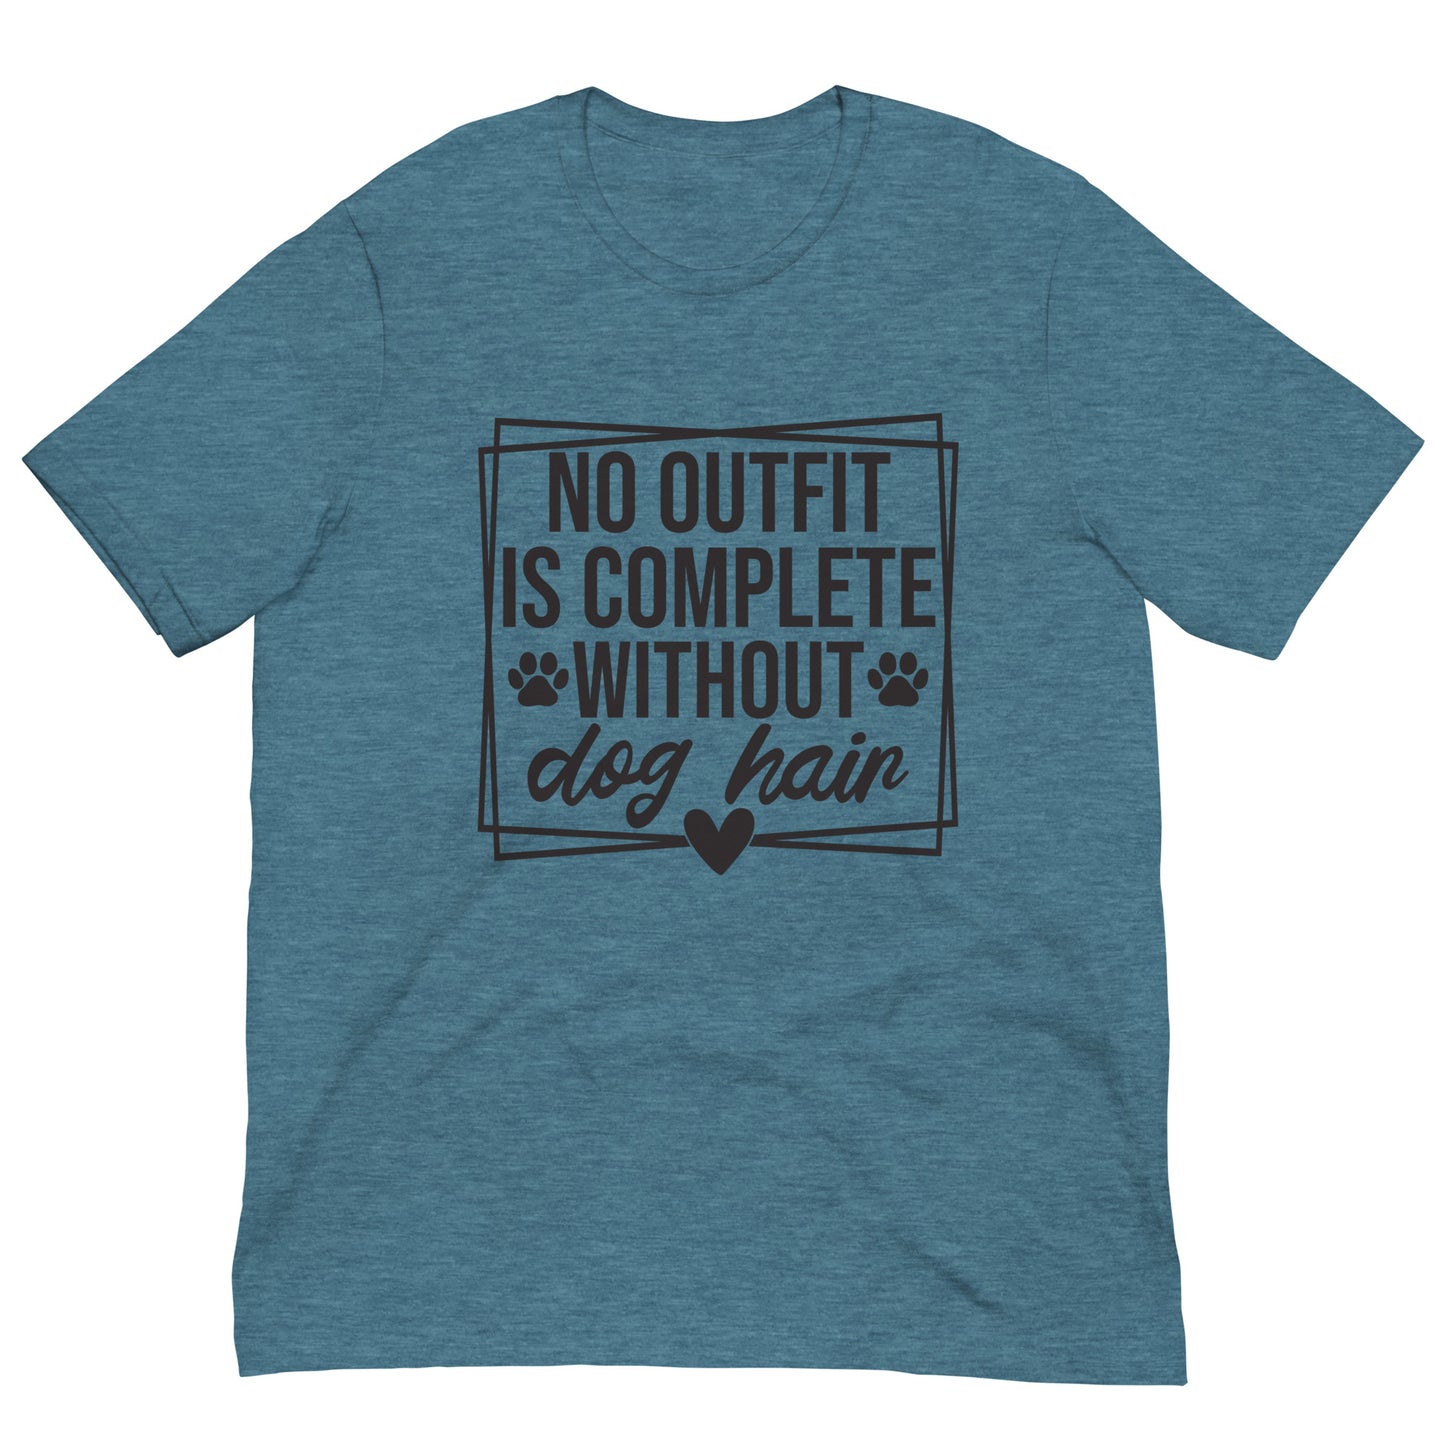 No outfit is complete without dog hair t-shirt